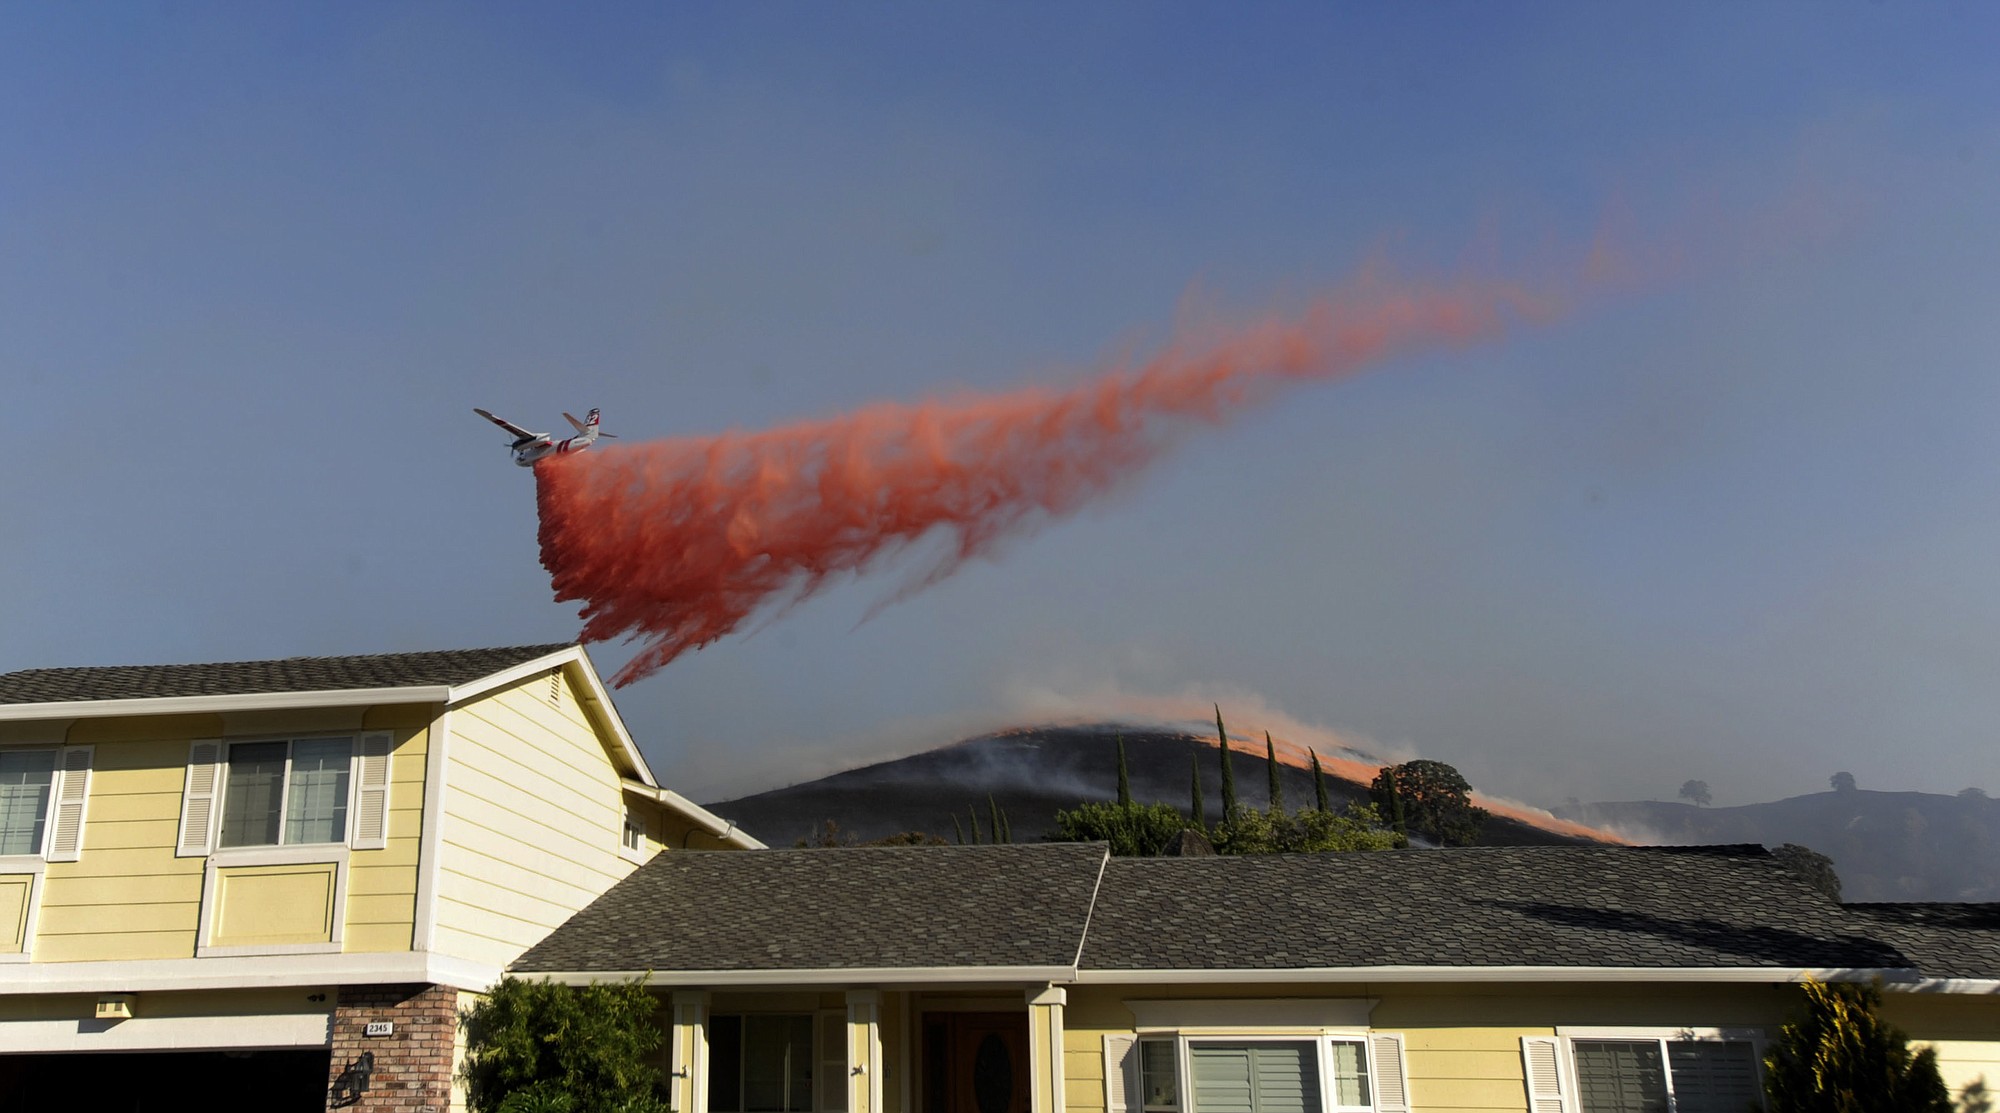 Fire retardant is dropped on hills behind evacuated homes on Foothill Drive in Antioch, Calif., on Wednesday.